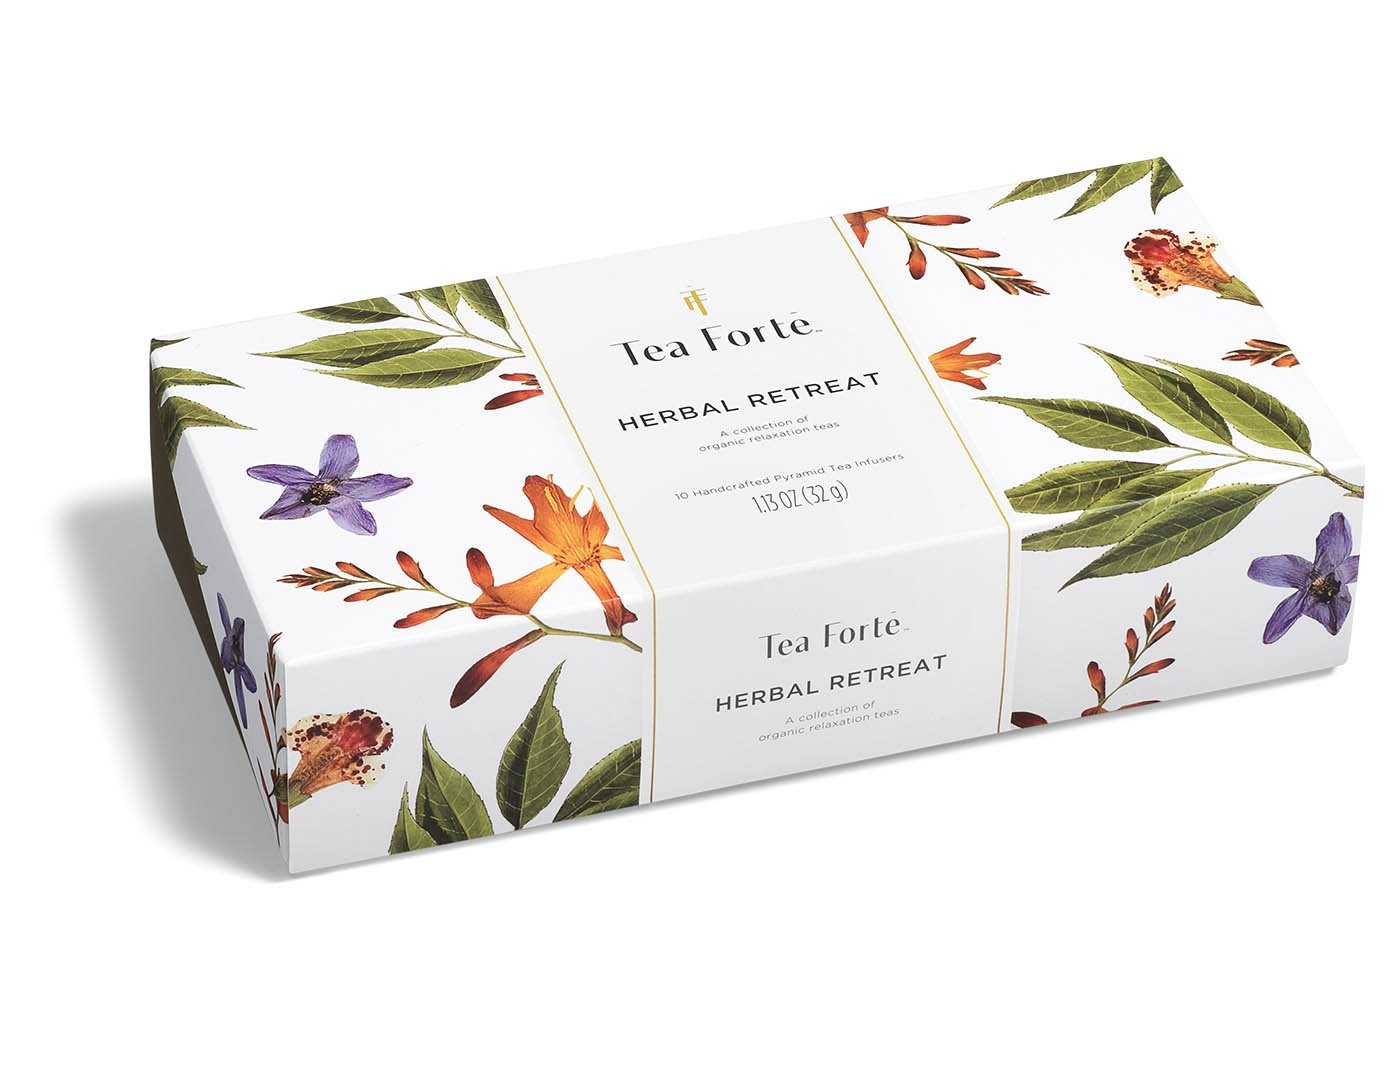 Herbal Retreat Collection Tea Forte